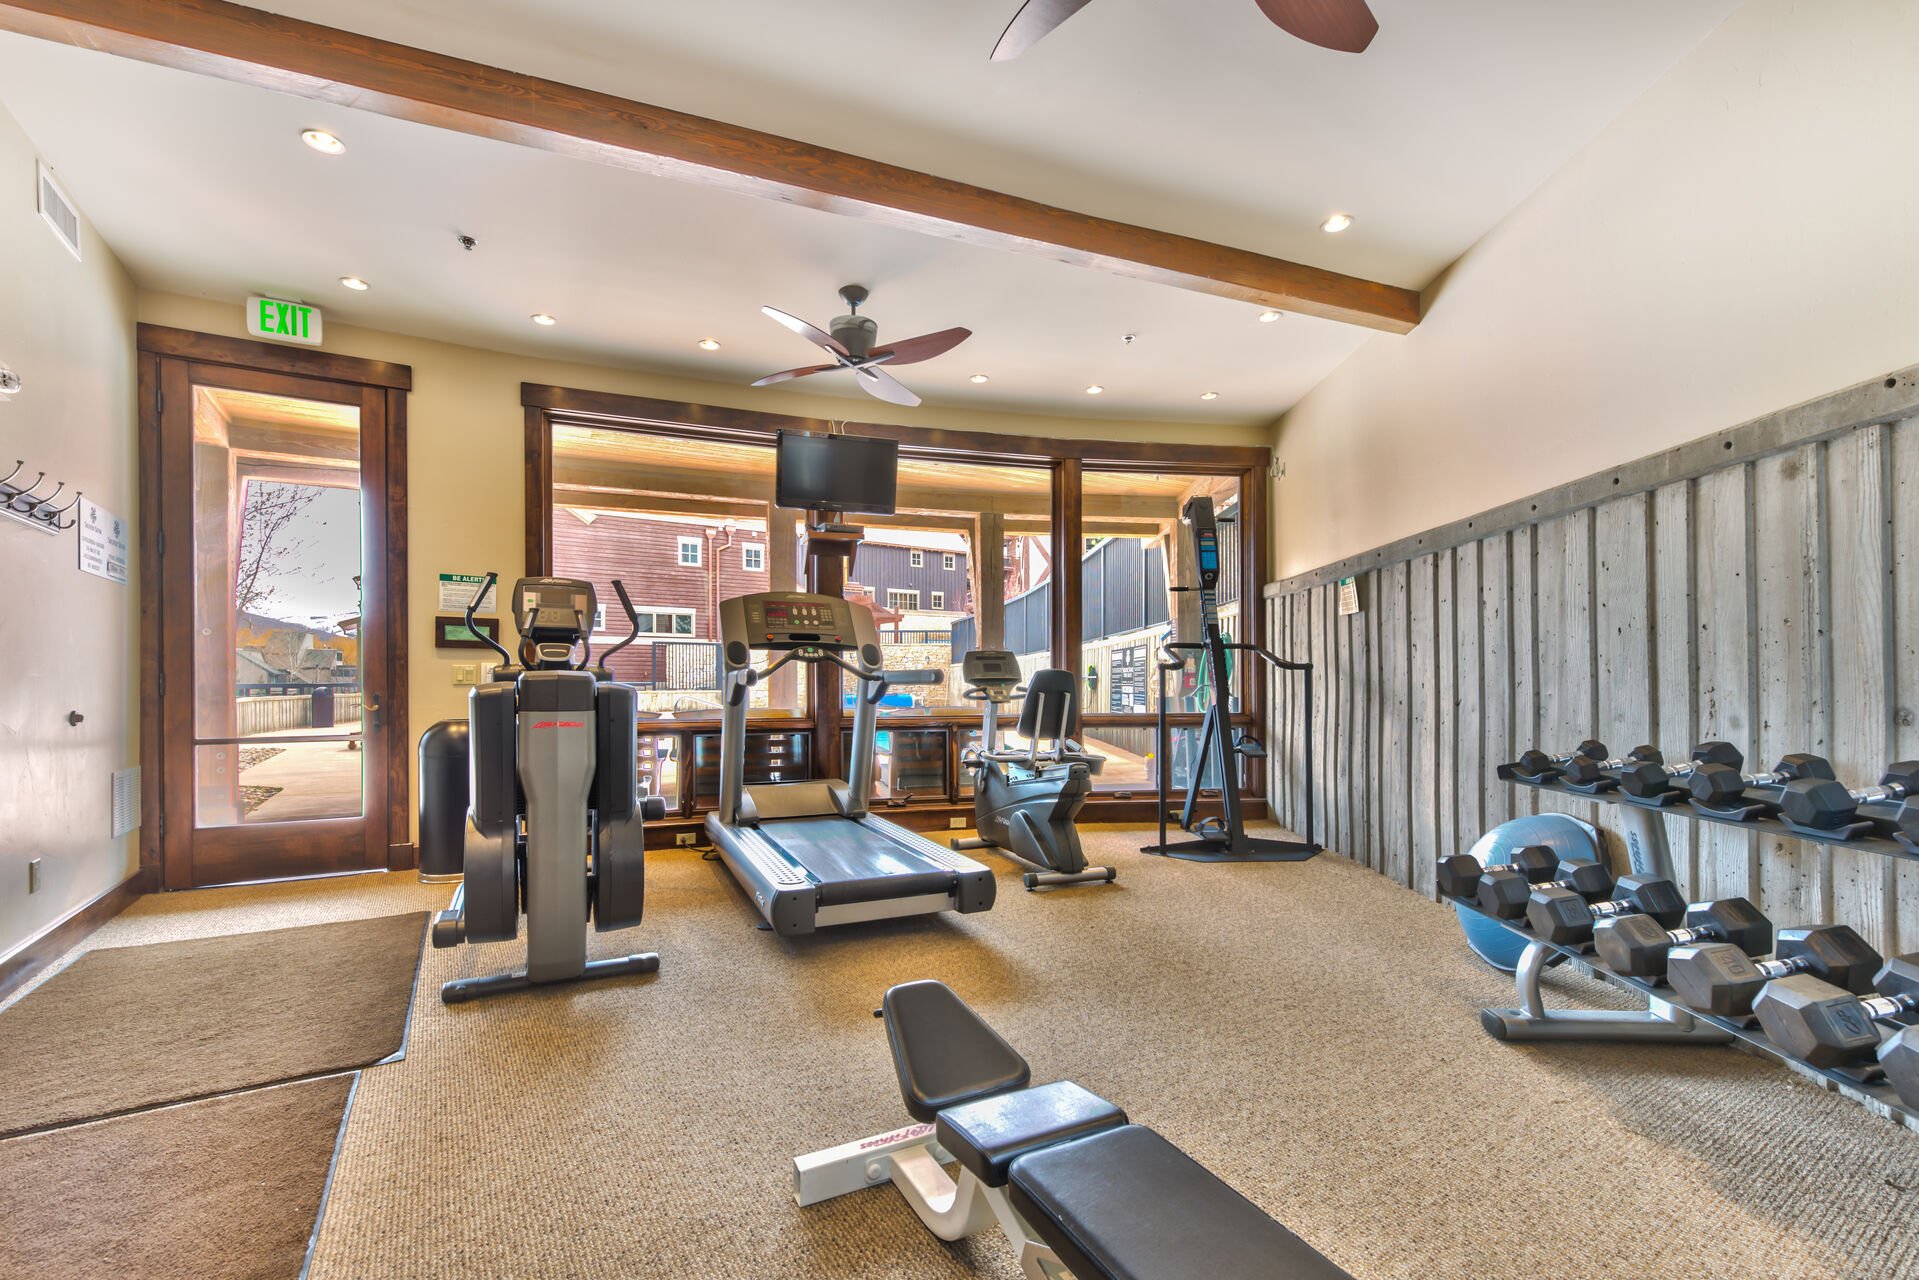 Silver Star Communal Fitness Room